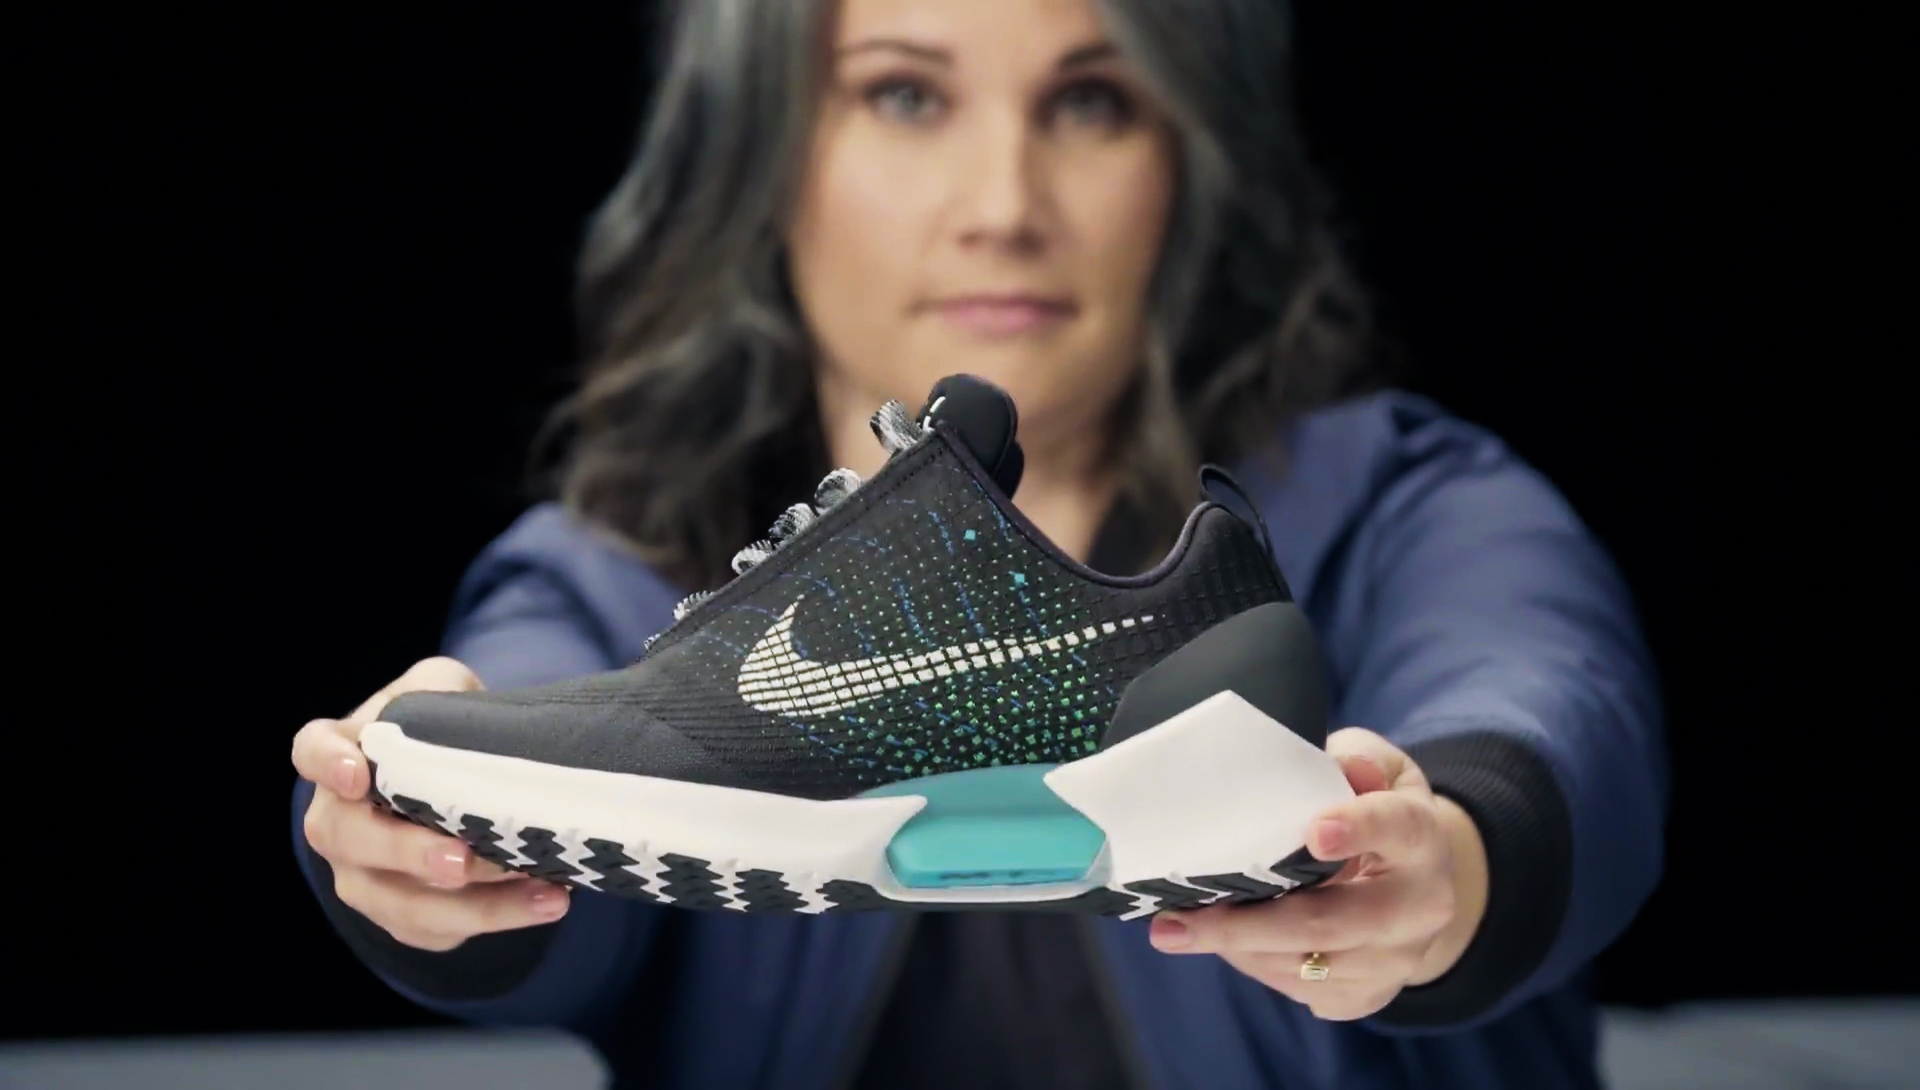 Nike Designer Shares First Prototype of Self-Lacing Shoes